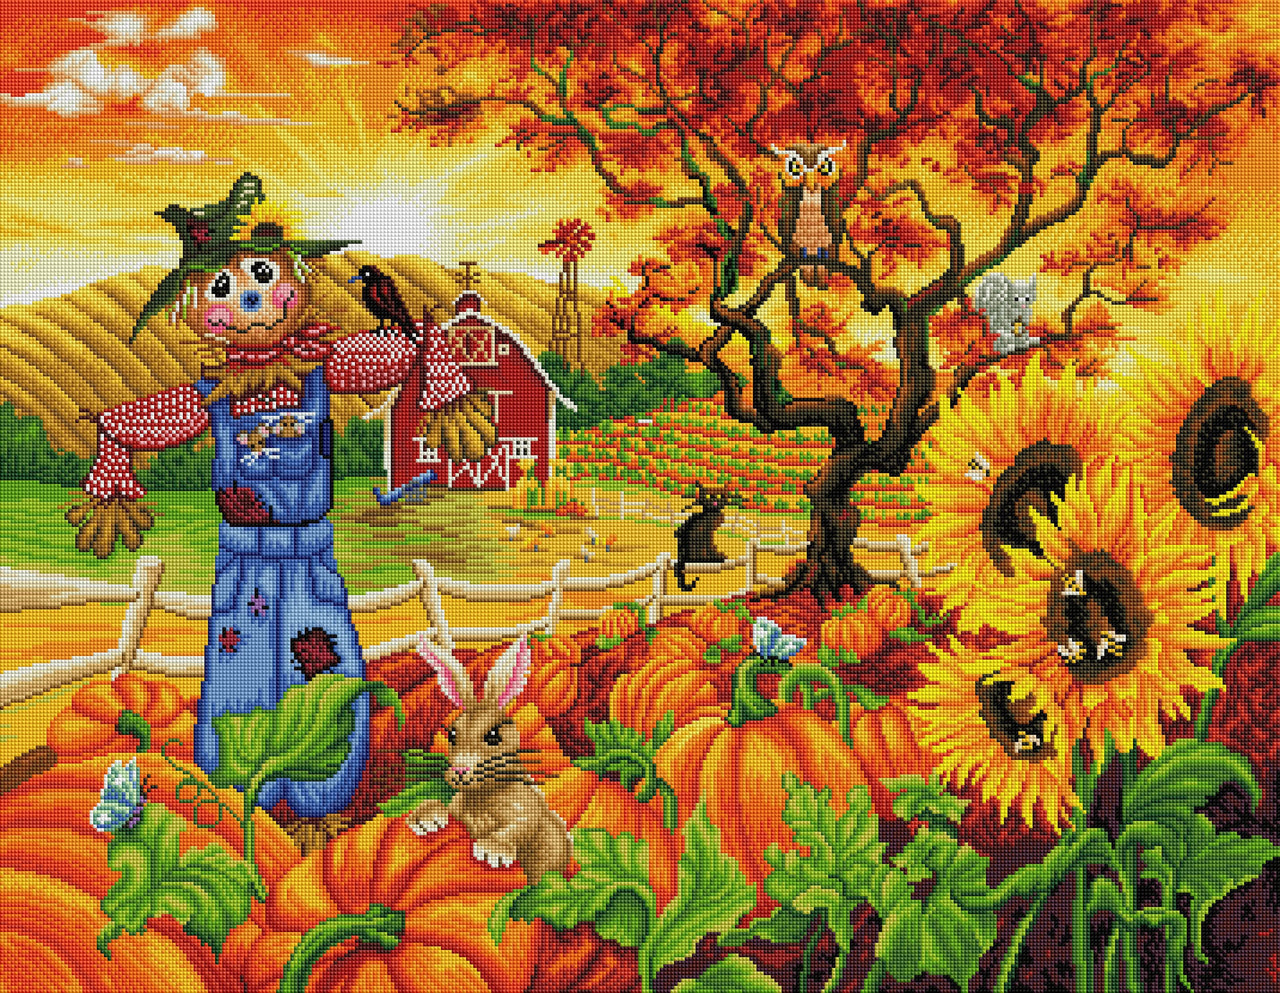 Diamond Painting Scarecrow and Friends 35.4" x 27.6″ (90cm x 70cm) / Square with 61 Colors including 4 ABs / 98,889